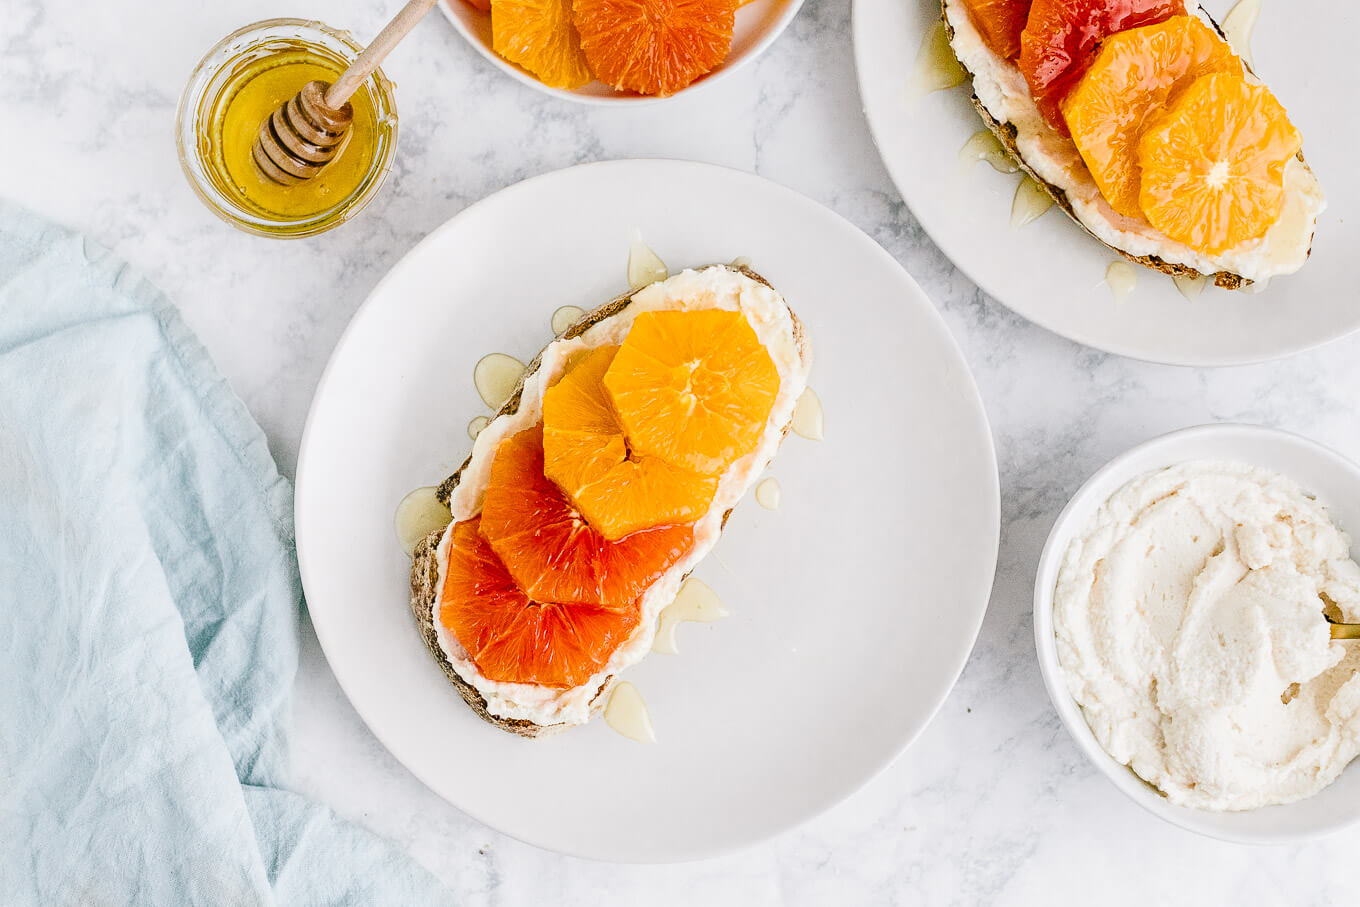 ricotta toast with orange slices and honey on plate